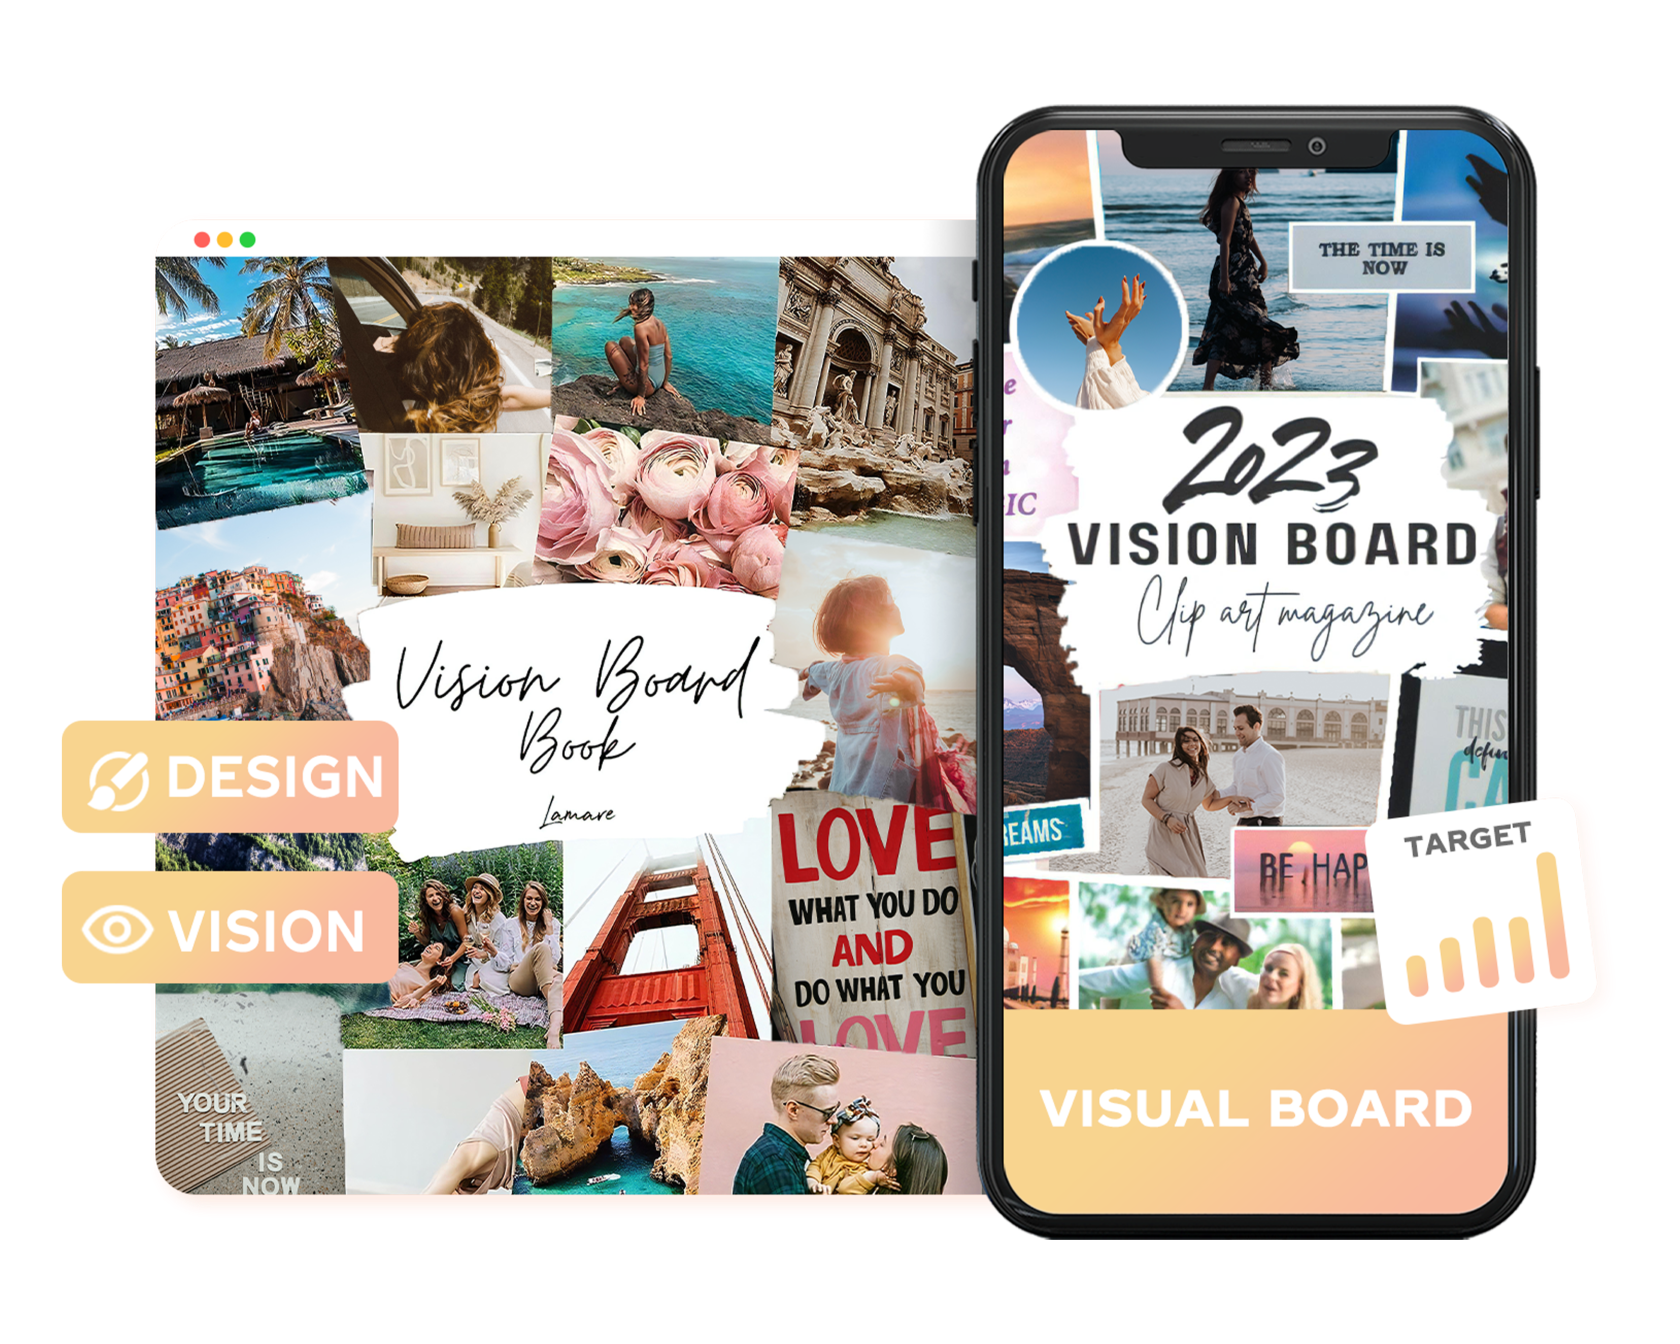 How to make a vision board that works in 2023